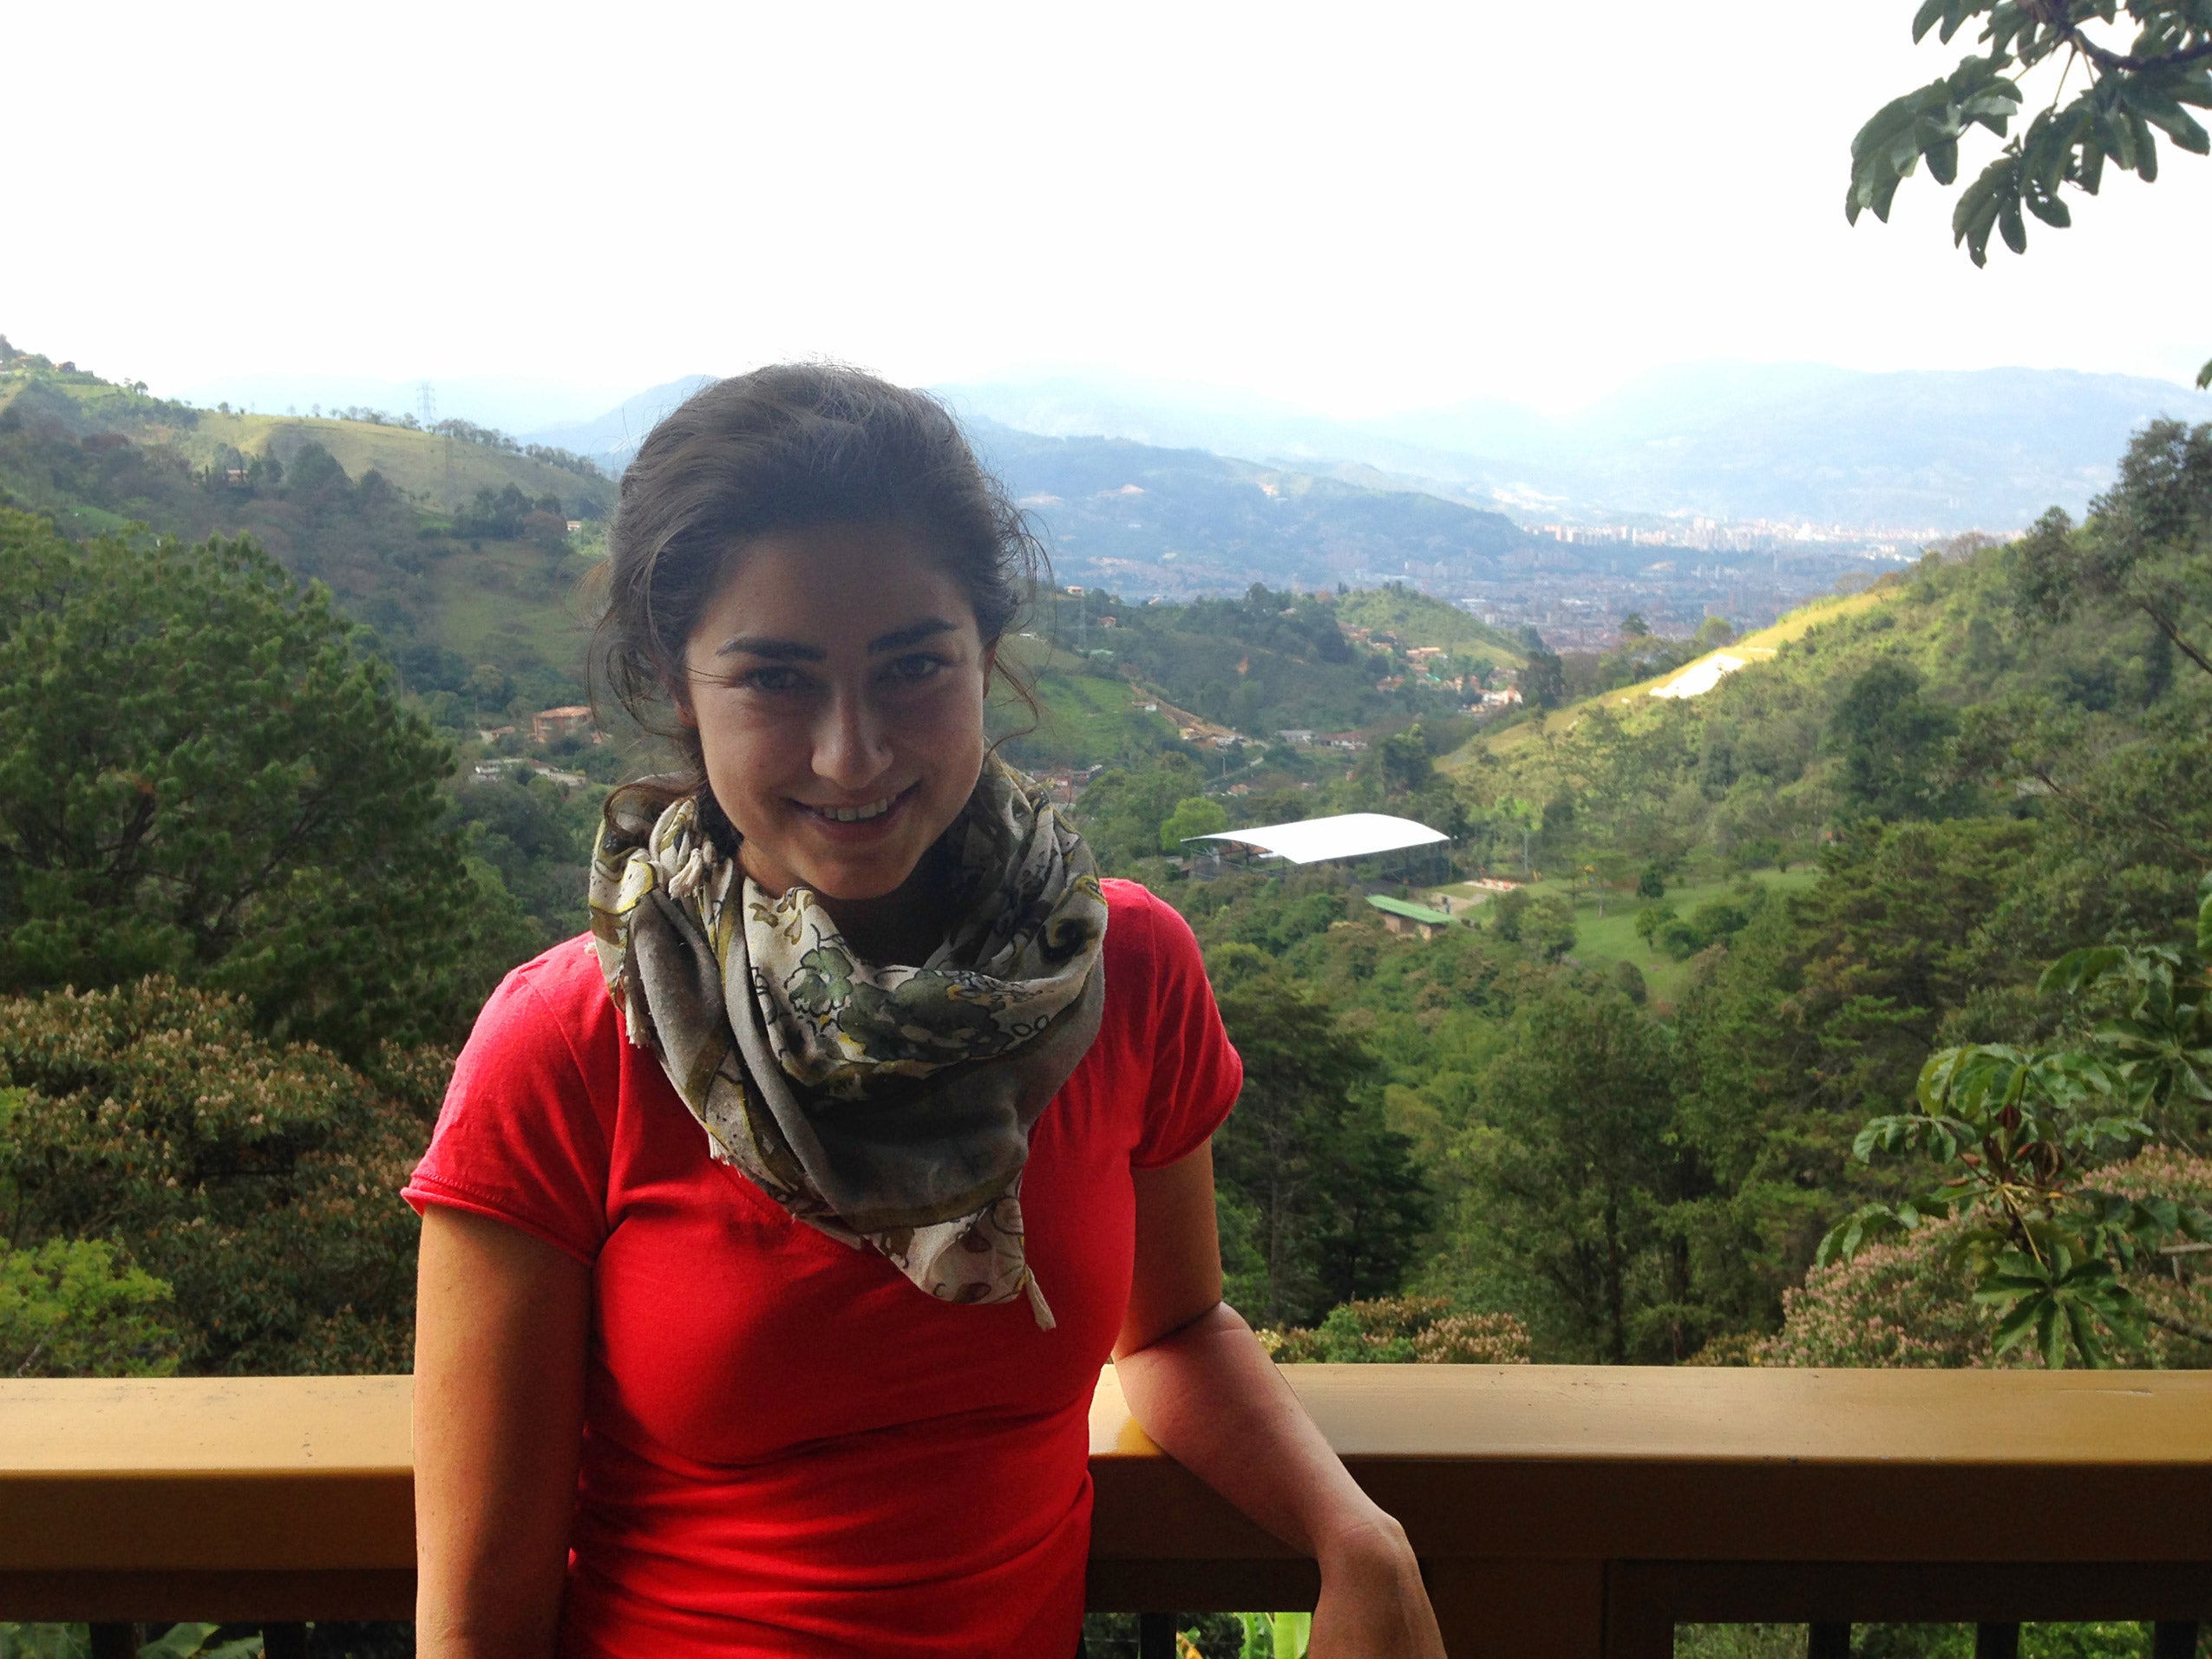 Sima Atri ’15 traveled to Medellin, Colombia, to research workers’ rights and empowerment issues.